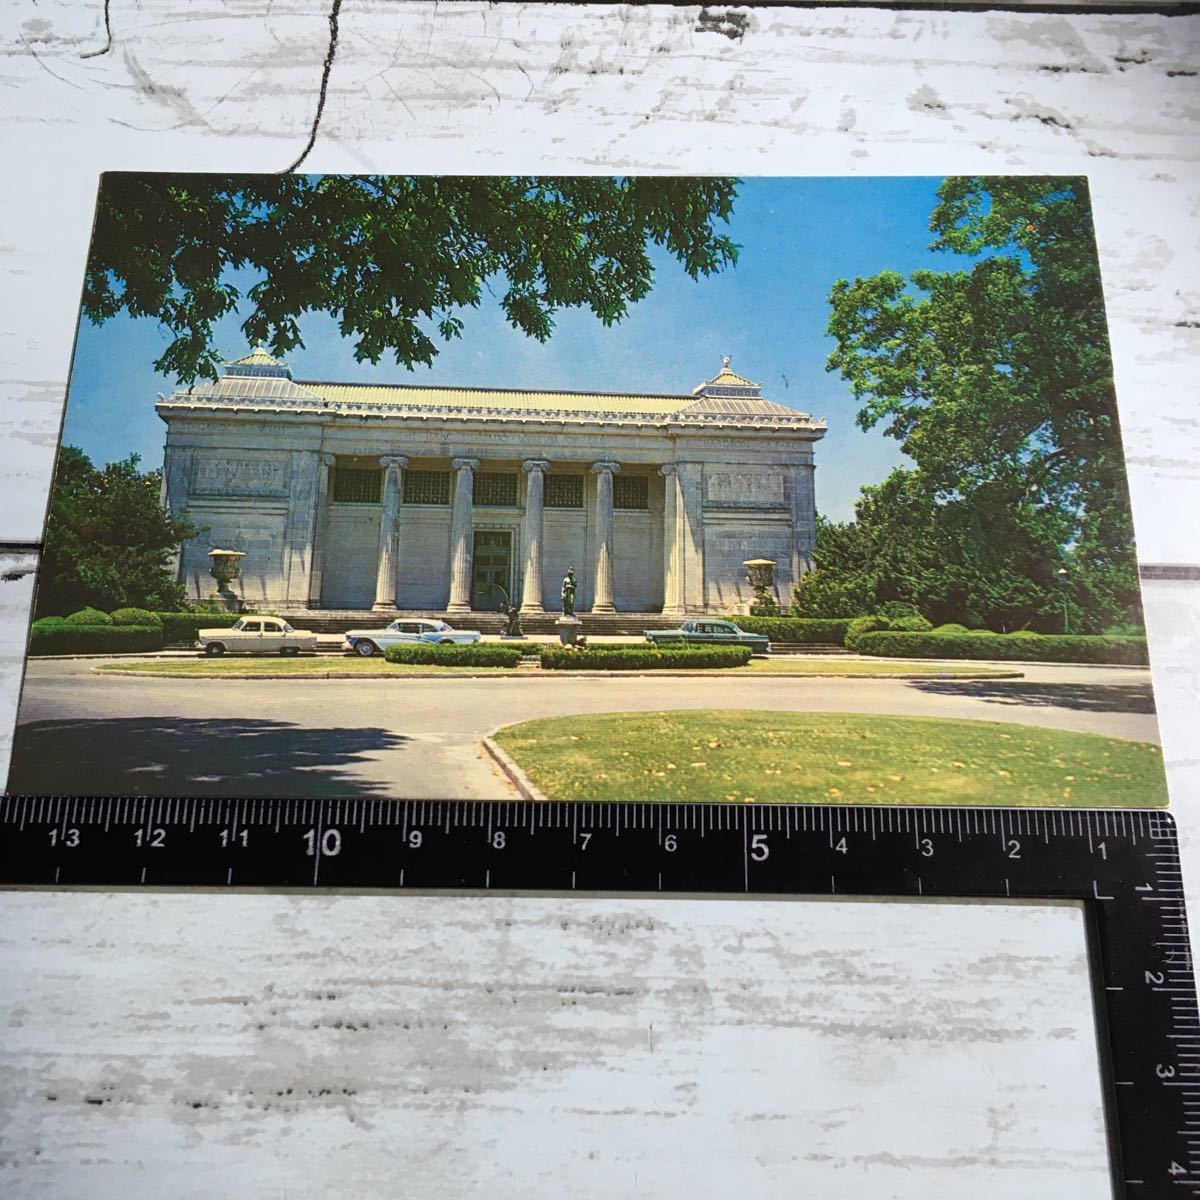  picture postcard picture postcard old picture postcard old post card postcard ISAAC Dell gado art gallery City park exists in Greece construction. impression .. building ., picture...(1576)